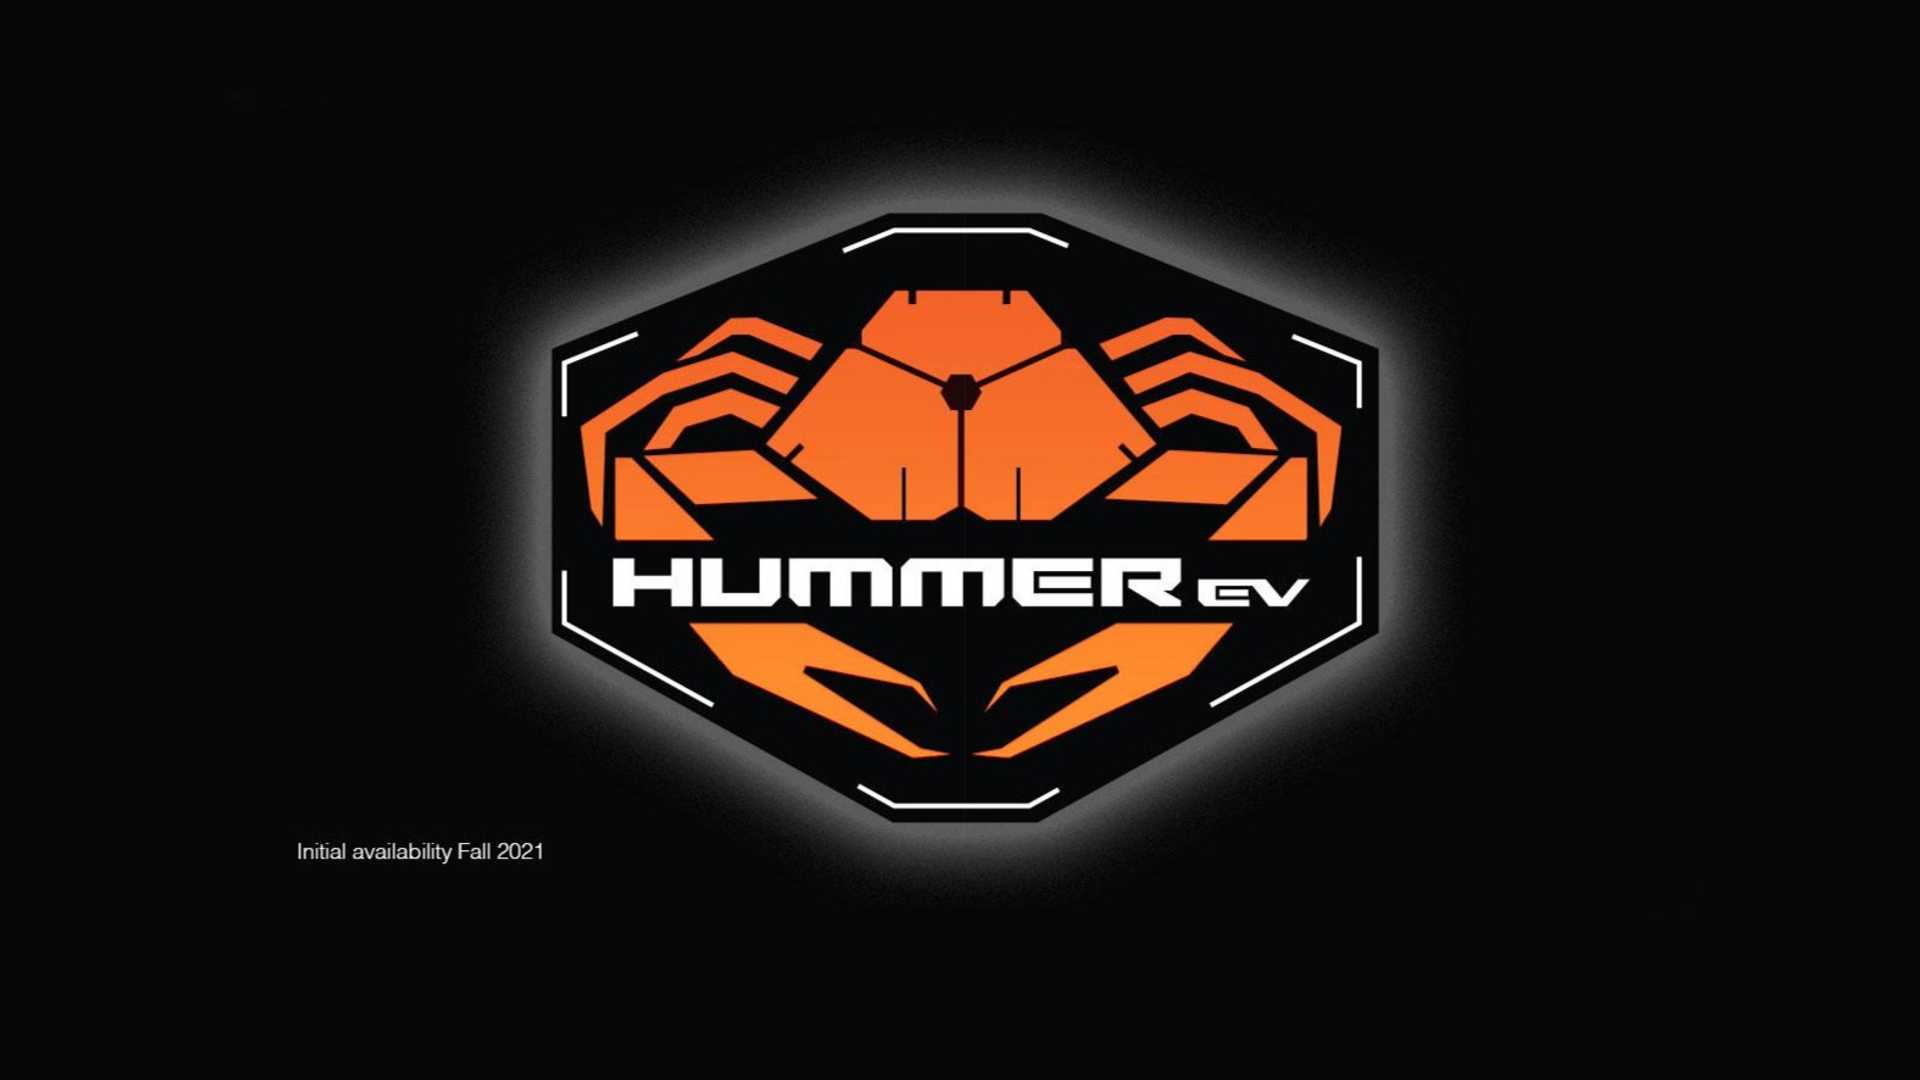 Gmc Hummer Ev Logo Features A Giant Crab And Here S Why